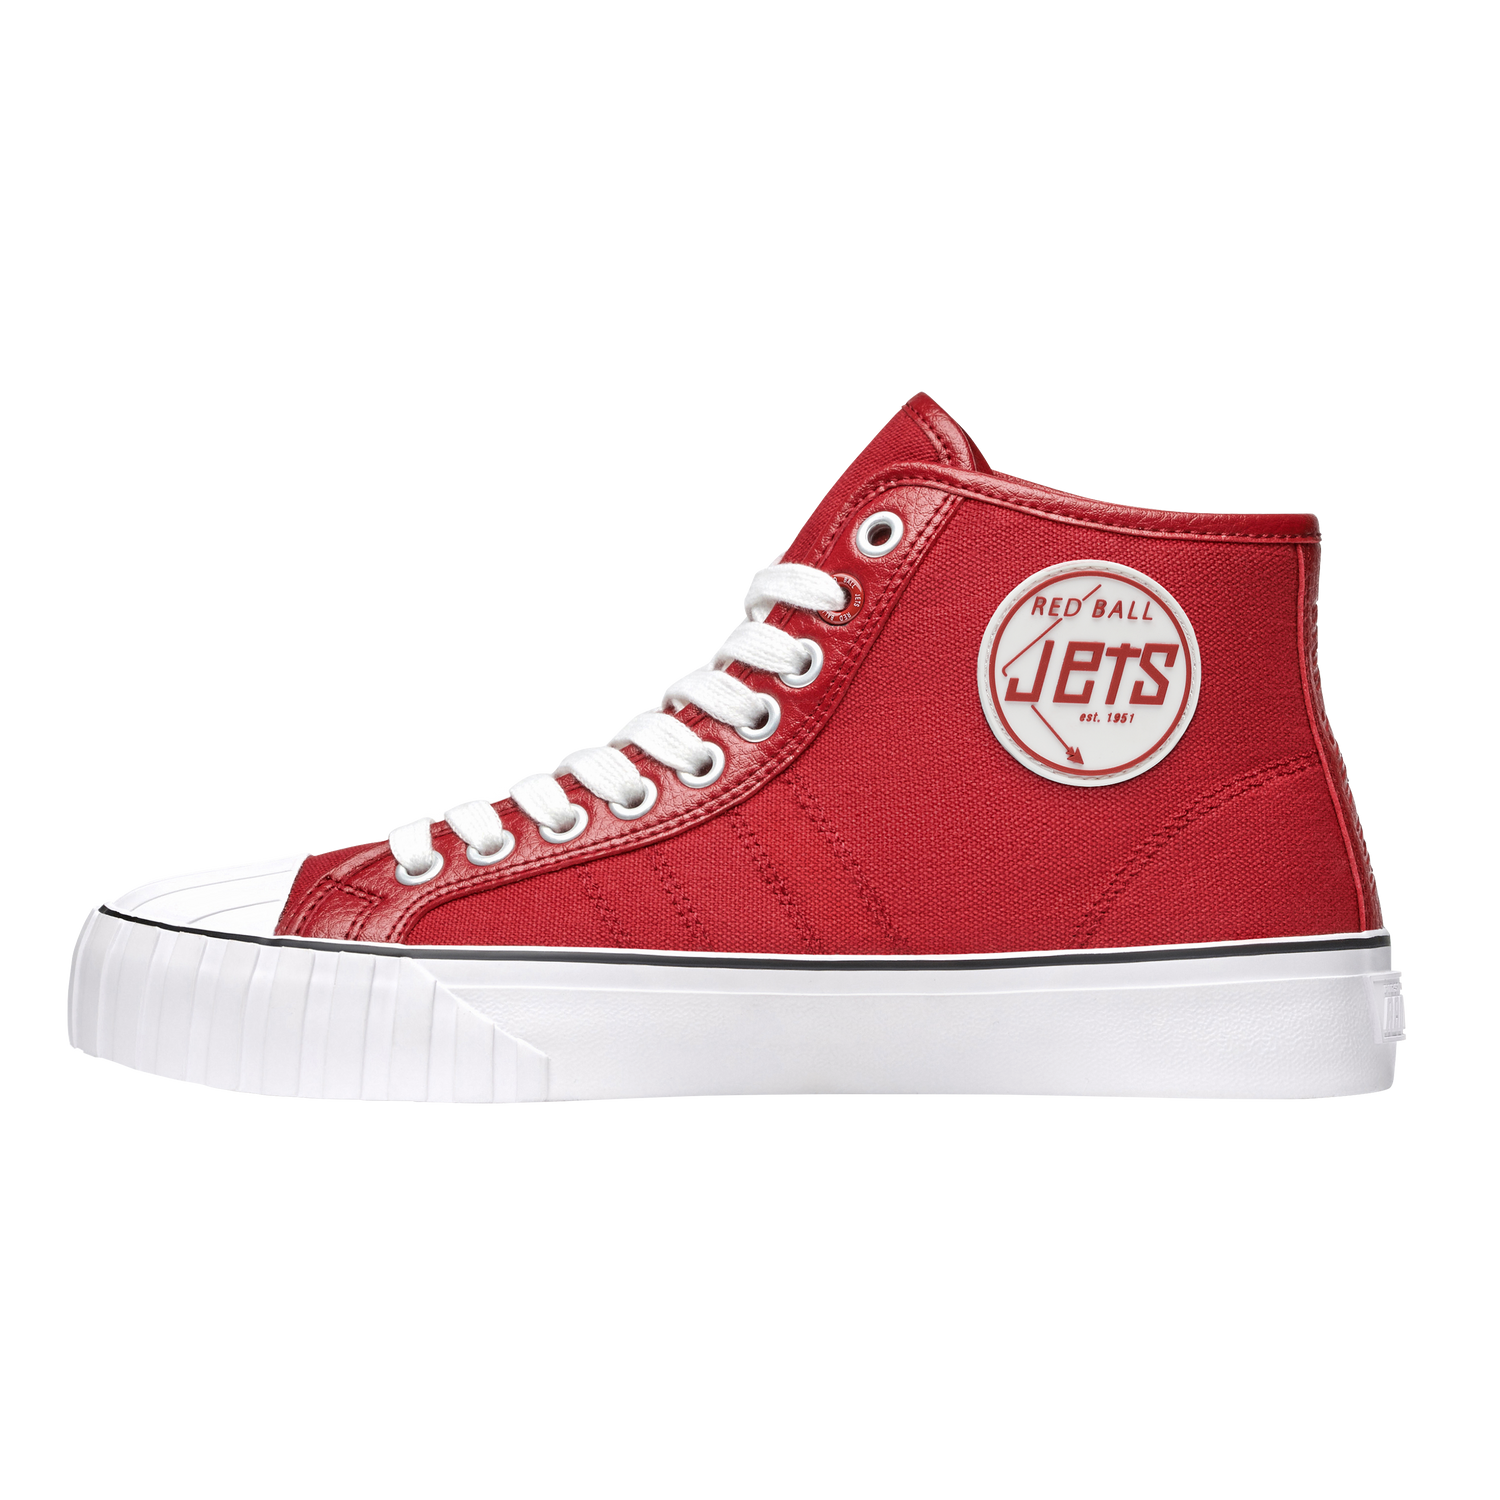 Red Ball Jets Hi Top Sneakers, Sz M 9.5 / W 11, Red